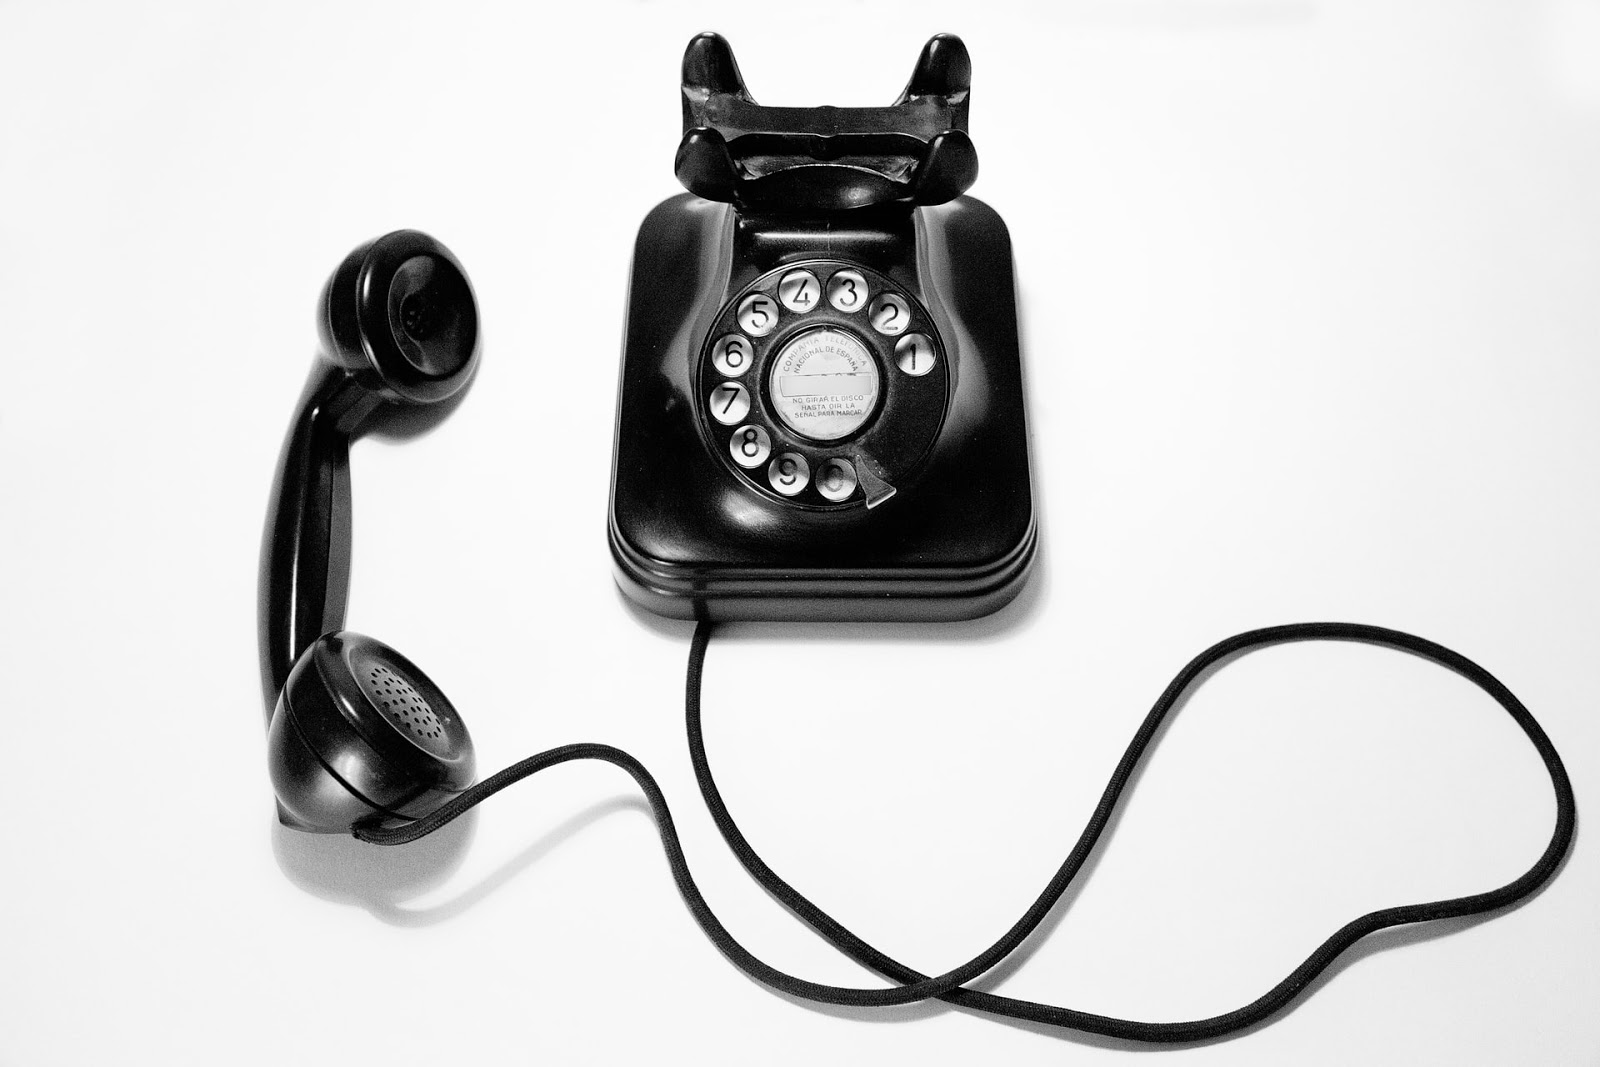 Black rotary telephone on the white surface